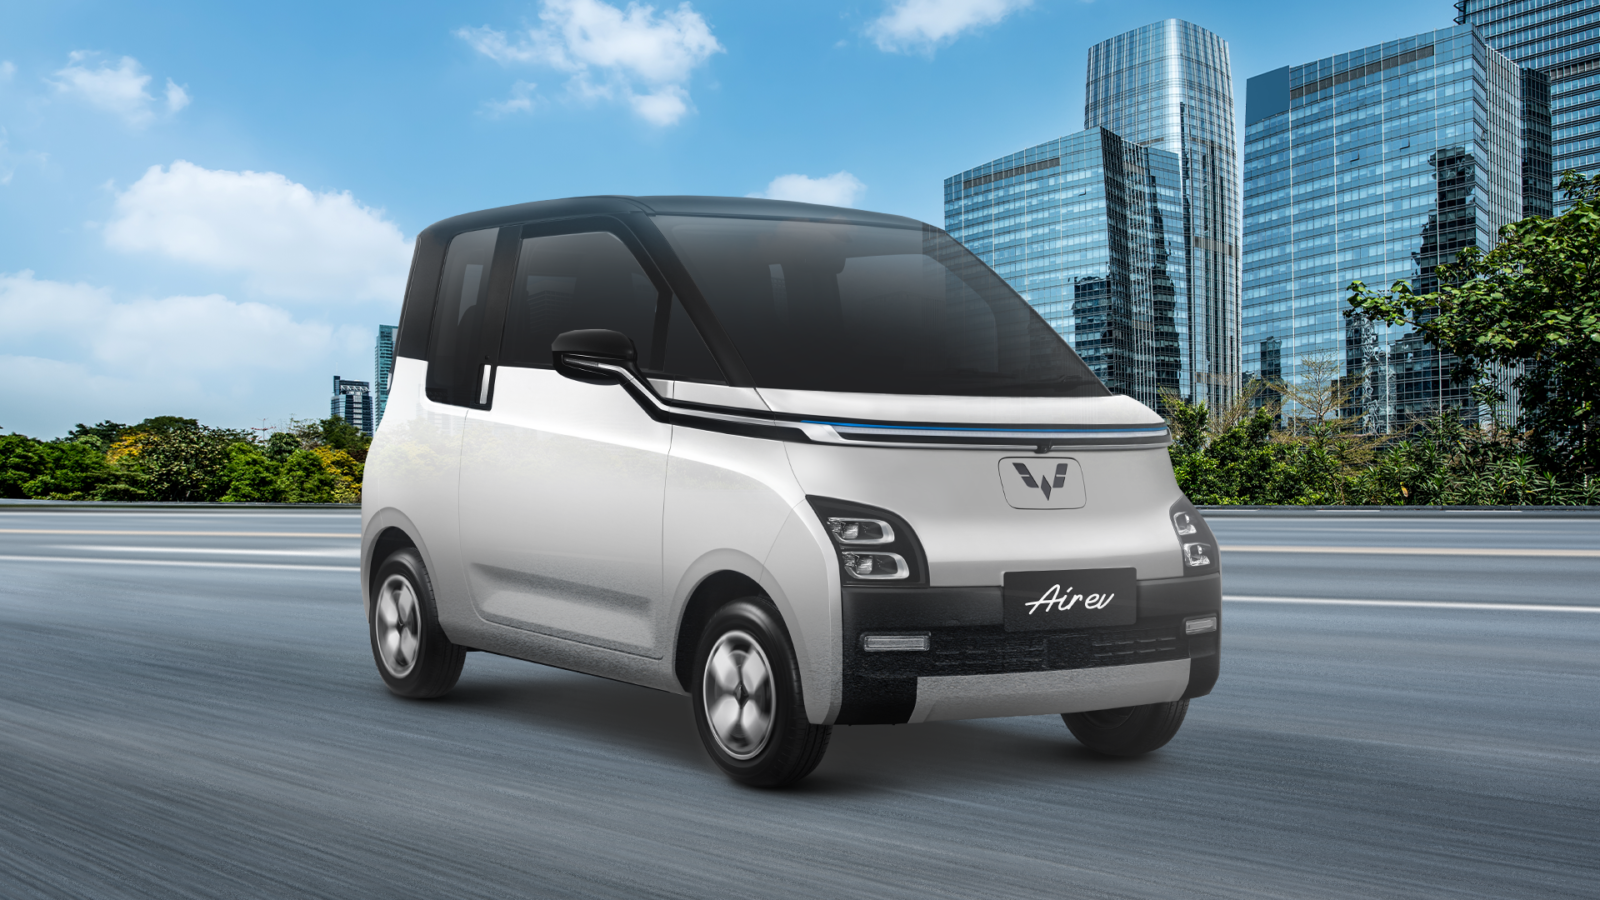 Image 6 Benefits of Driving Wuling Air ev Electri Cars on the Road